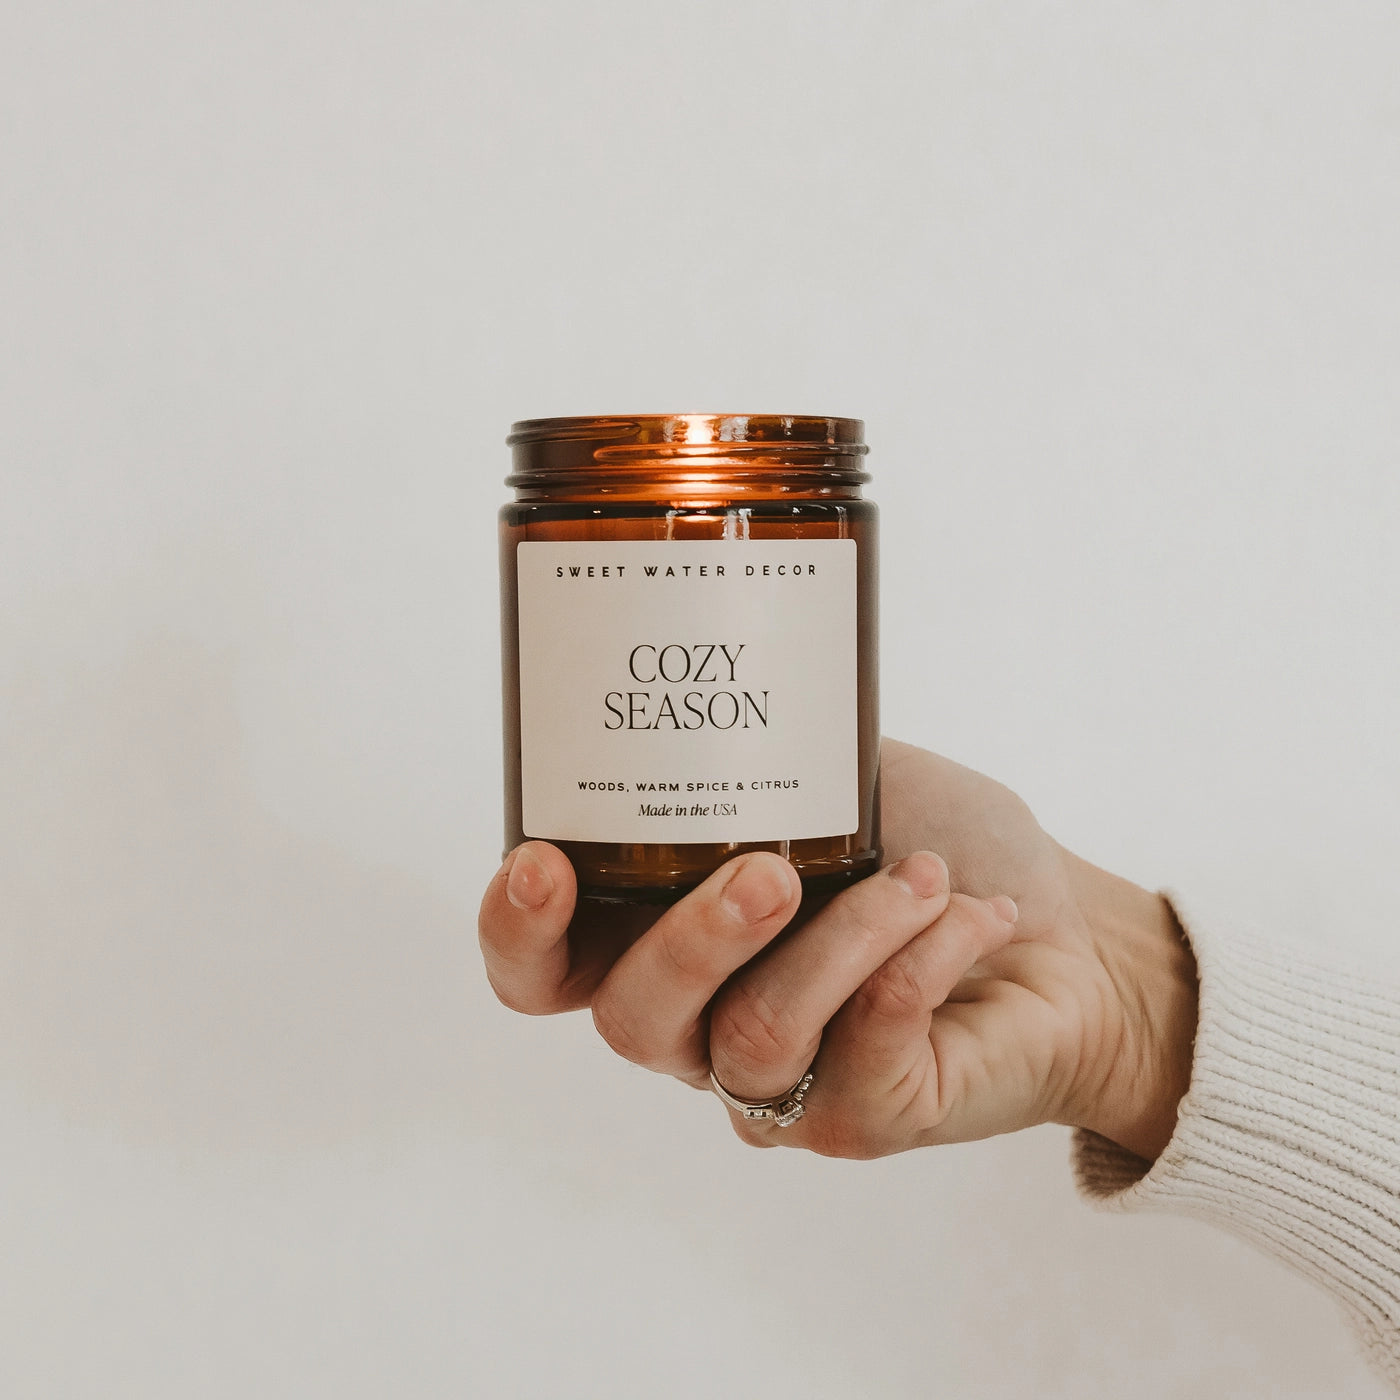 The Cozy Season Soy Candle